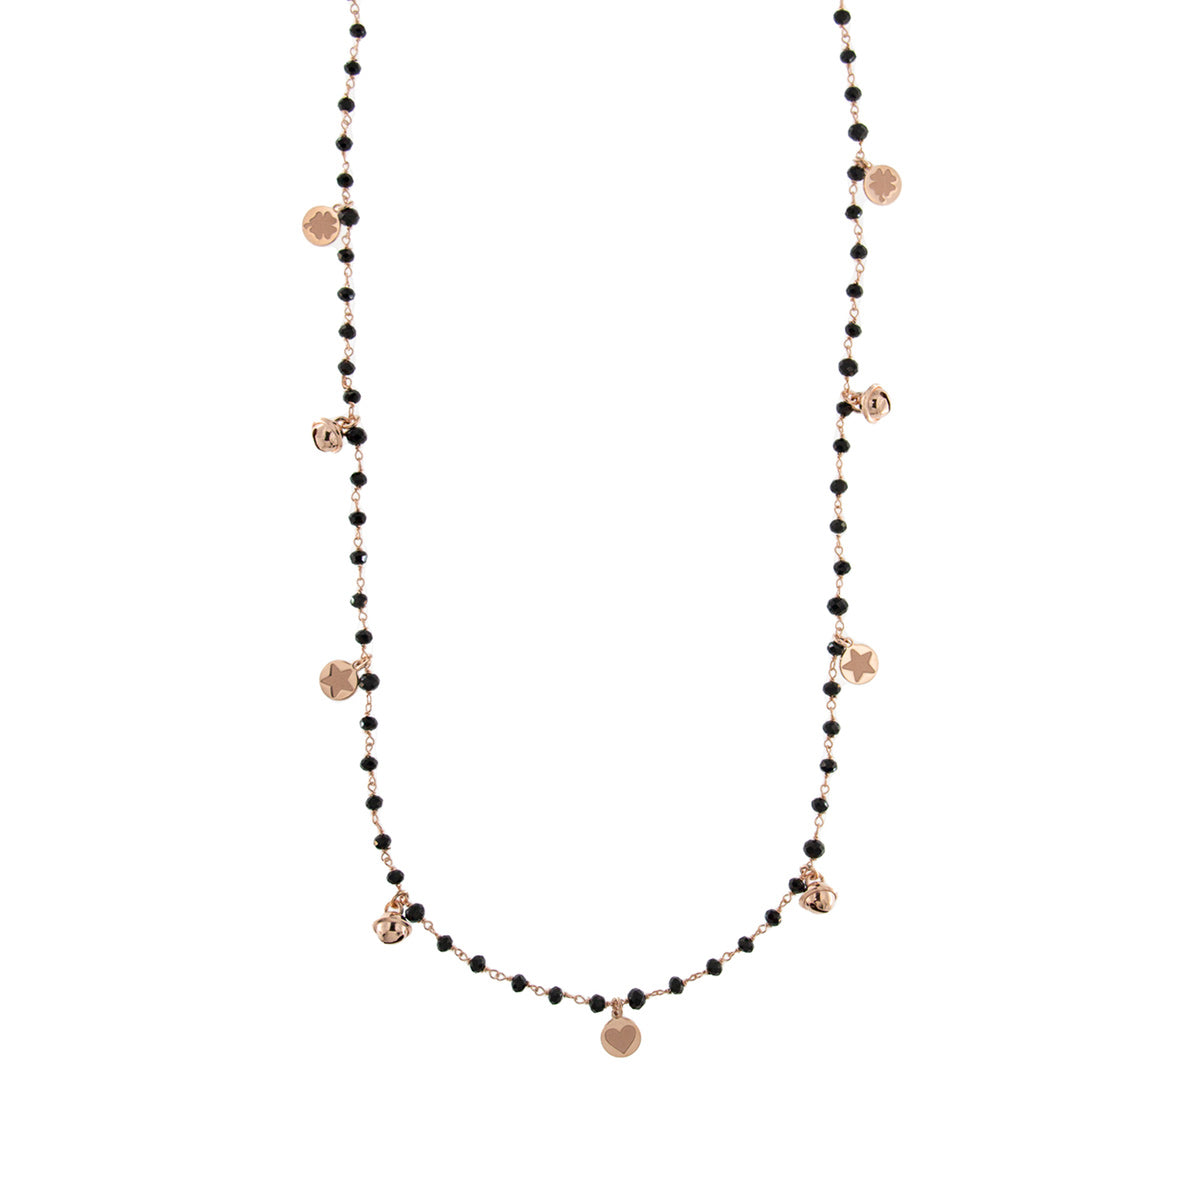 Necklaces - CHAINED LONG NECKLACE - GIPSY TIERRA BLACK - 1 | Rue des Mille